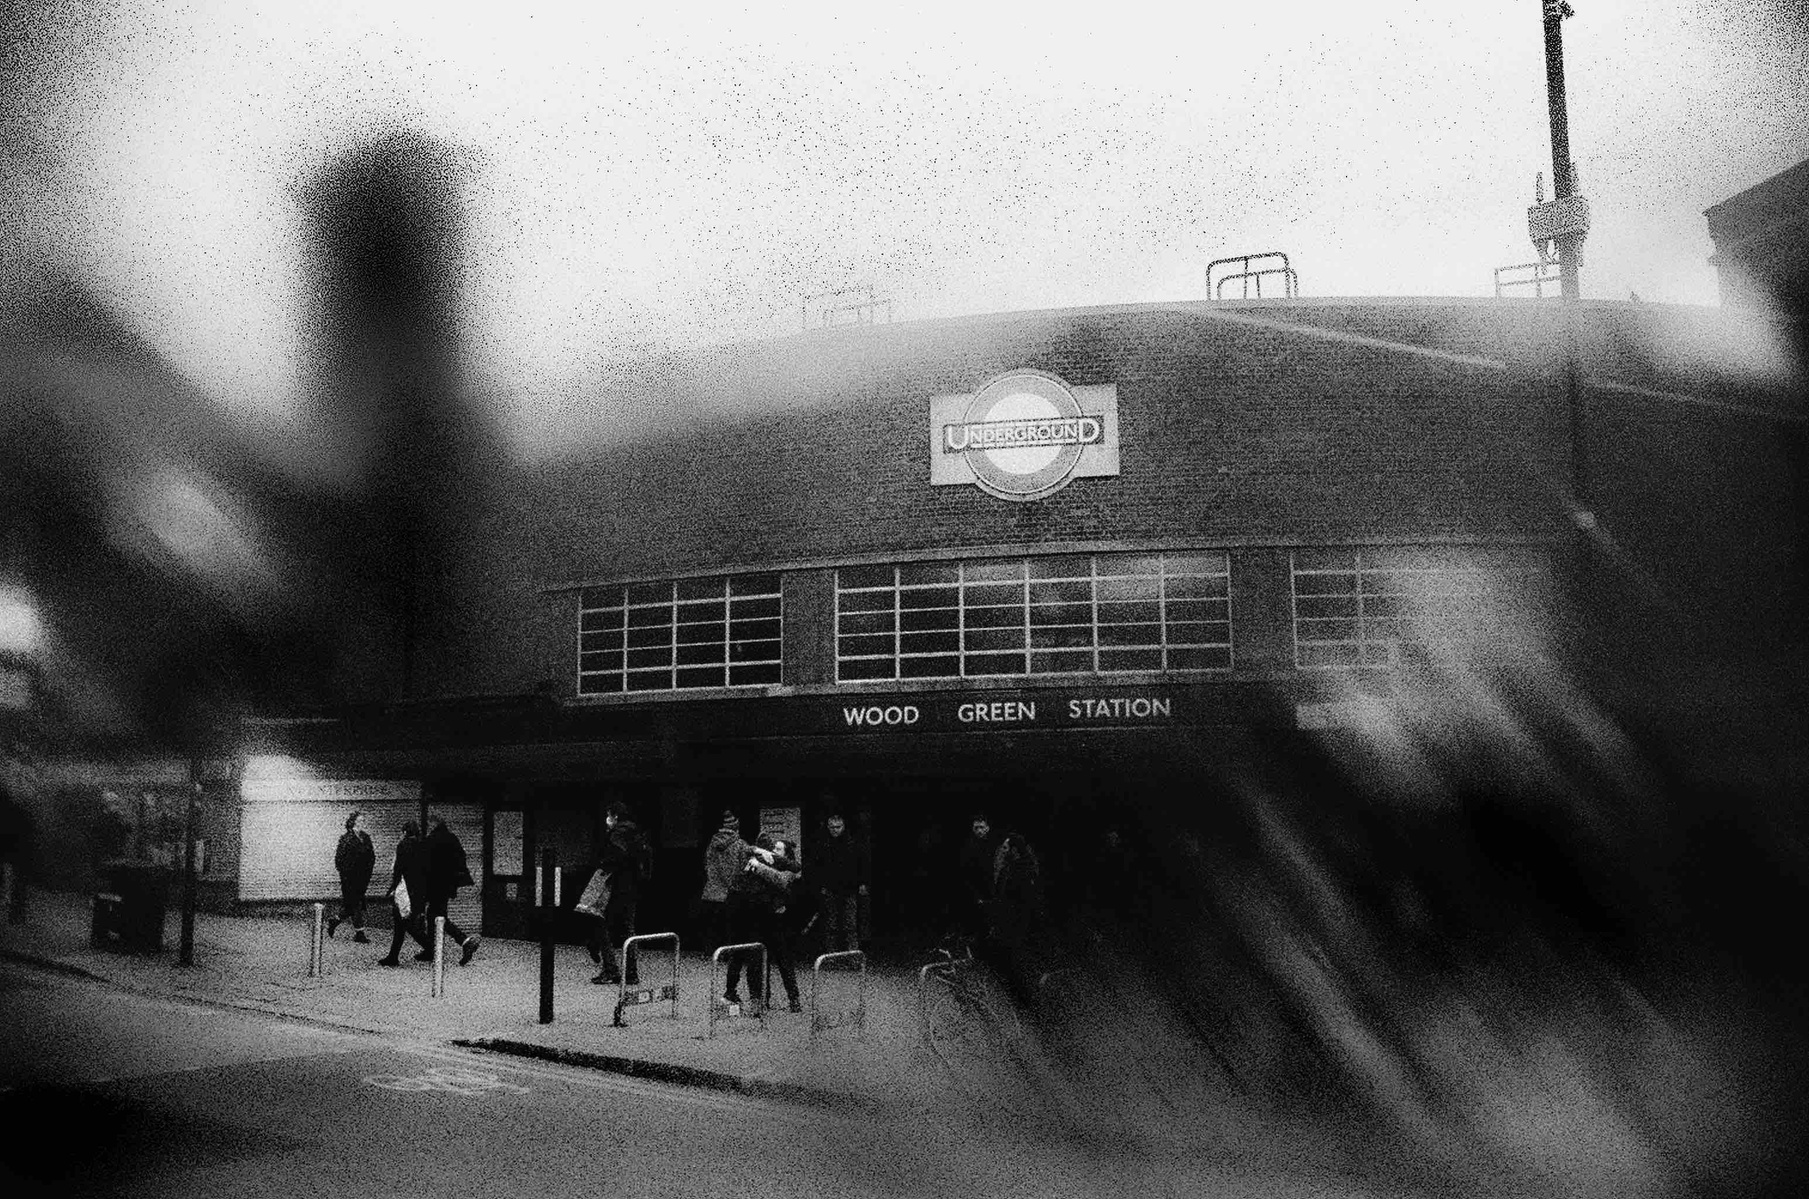 black and white, grainy 35mm picture of Wood Green station.